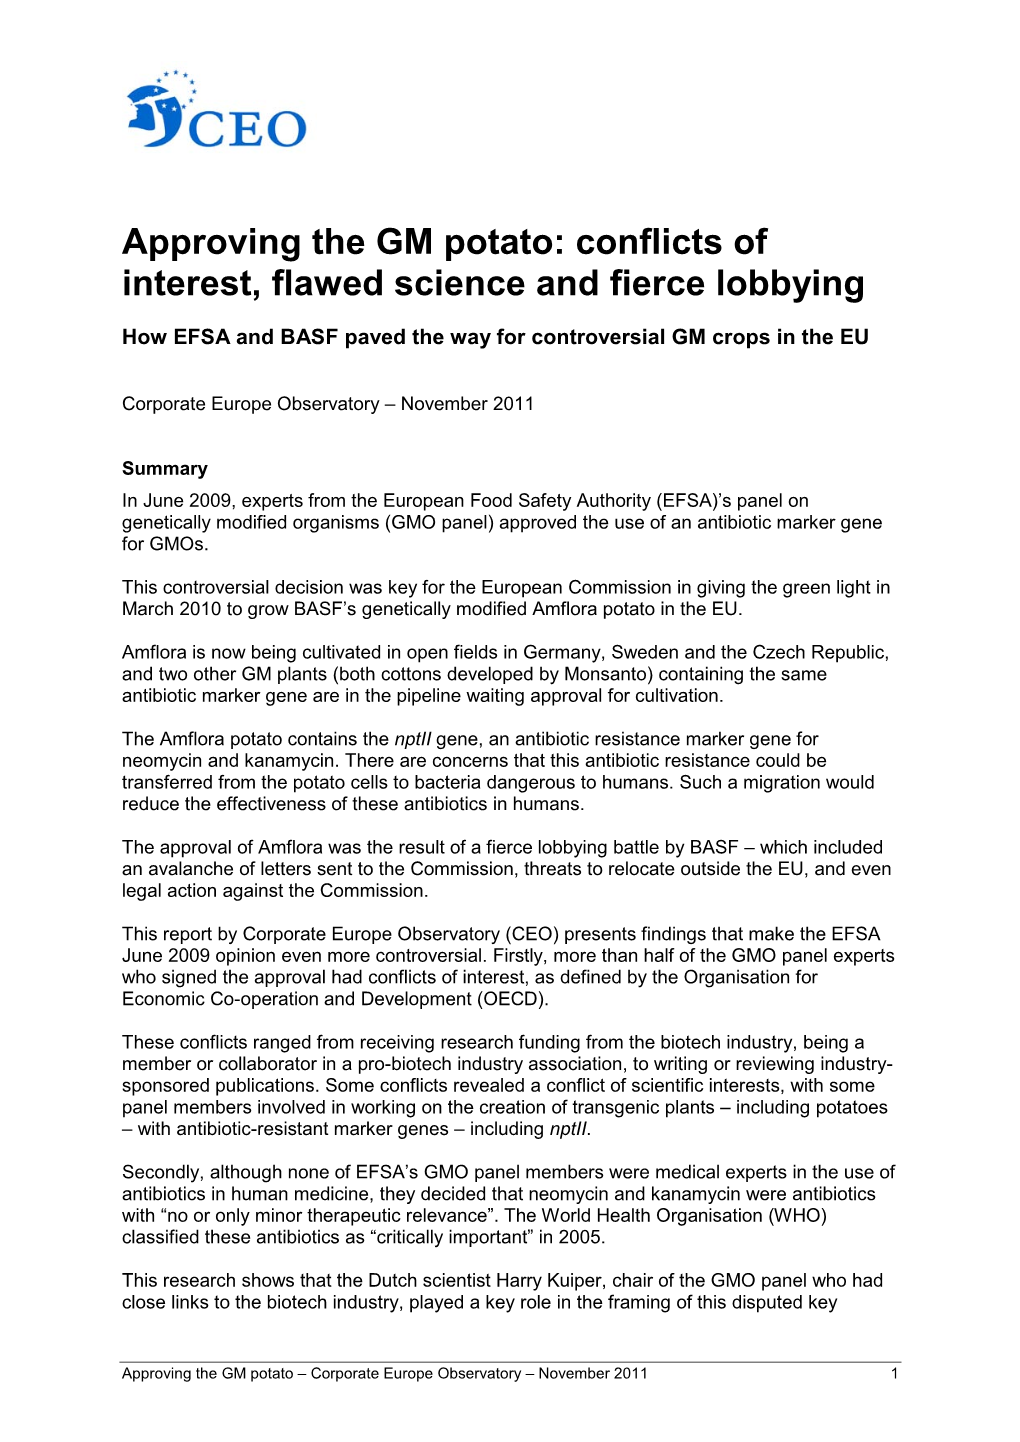 Approving the GM Potato: Conflicts of Interest, Flawed Science and Fierce Lobbying